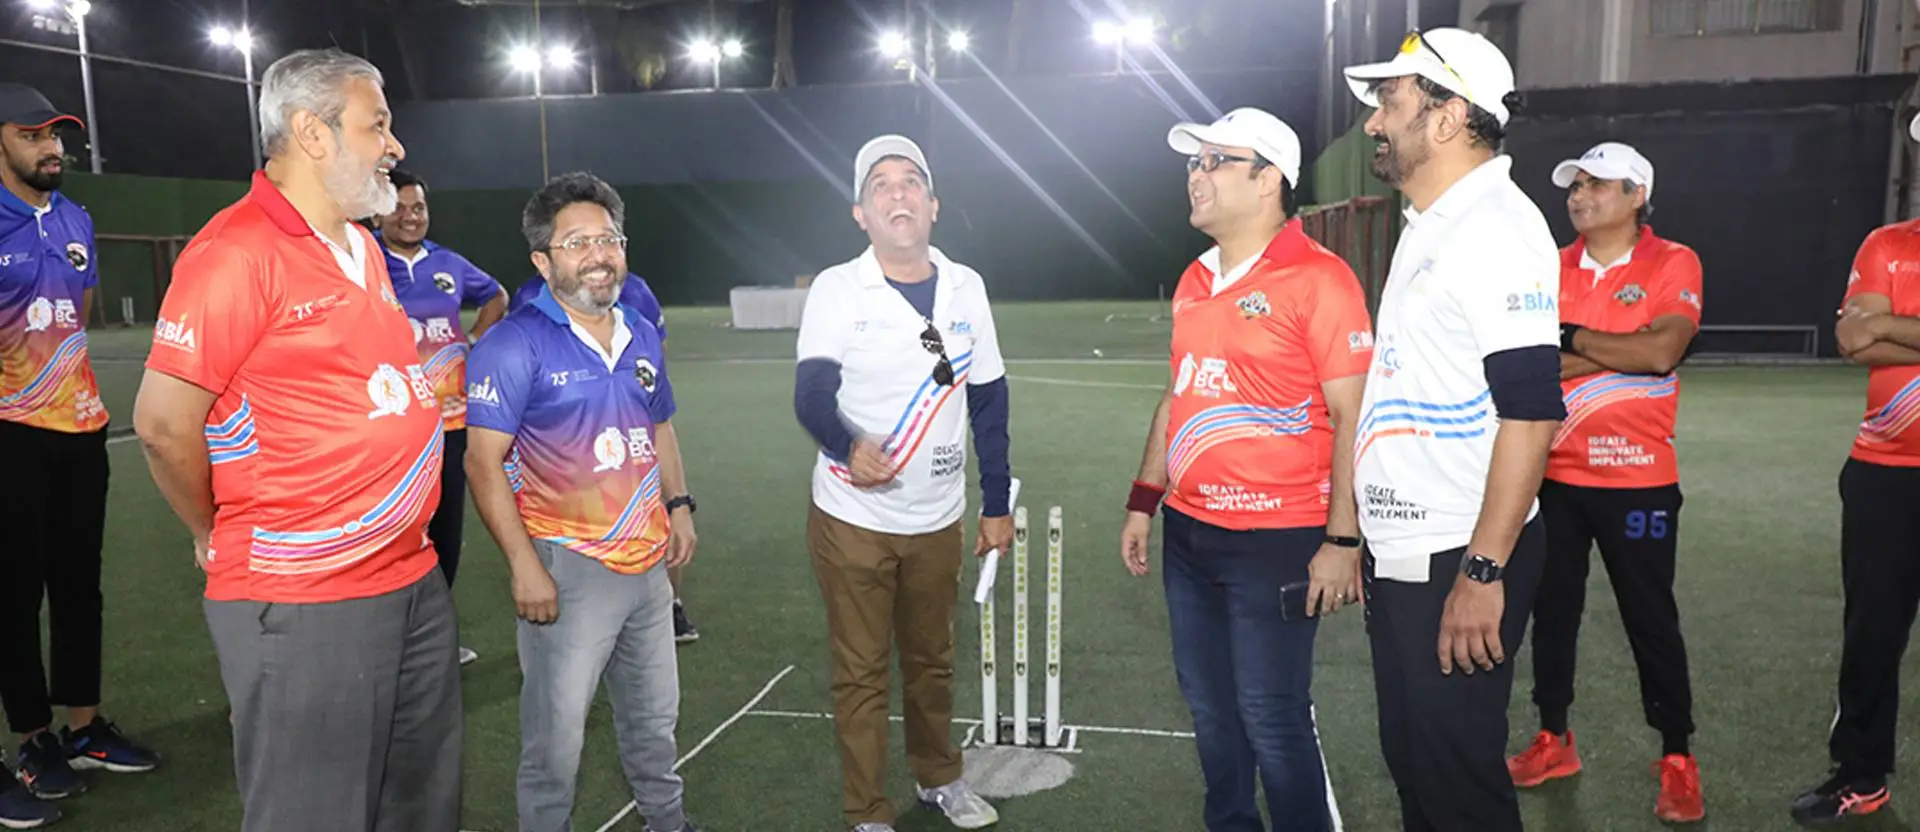 The coin toss - Roman BIA Cricket League organised by Bombay Industries Association BIA under the Presidency of Mr. Nevil Sanghvi